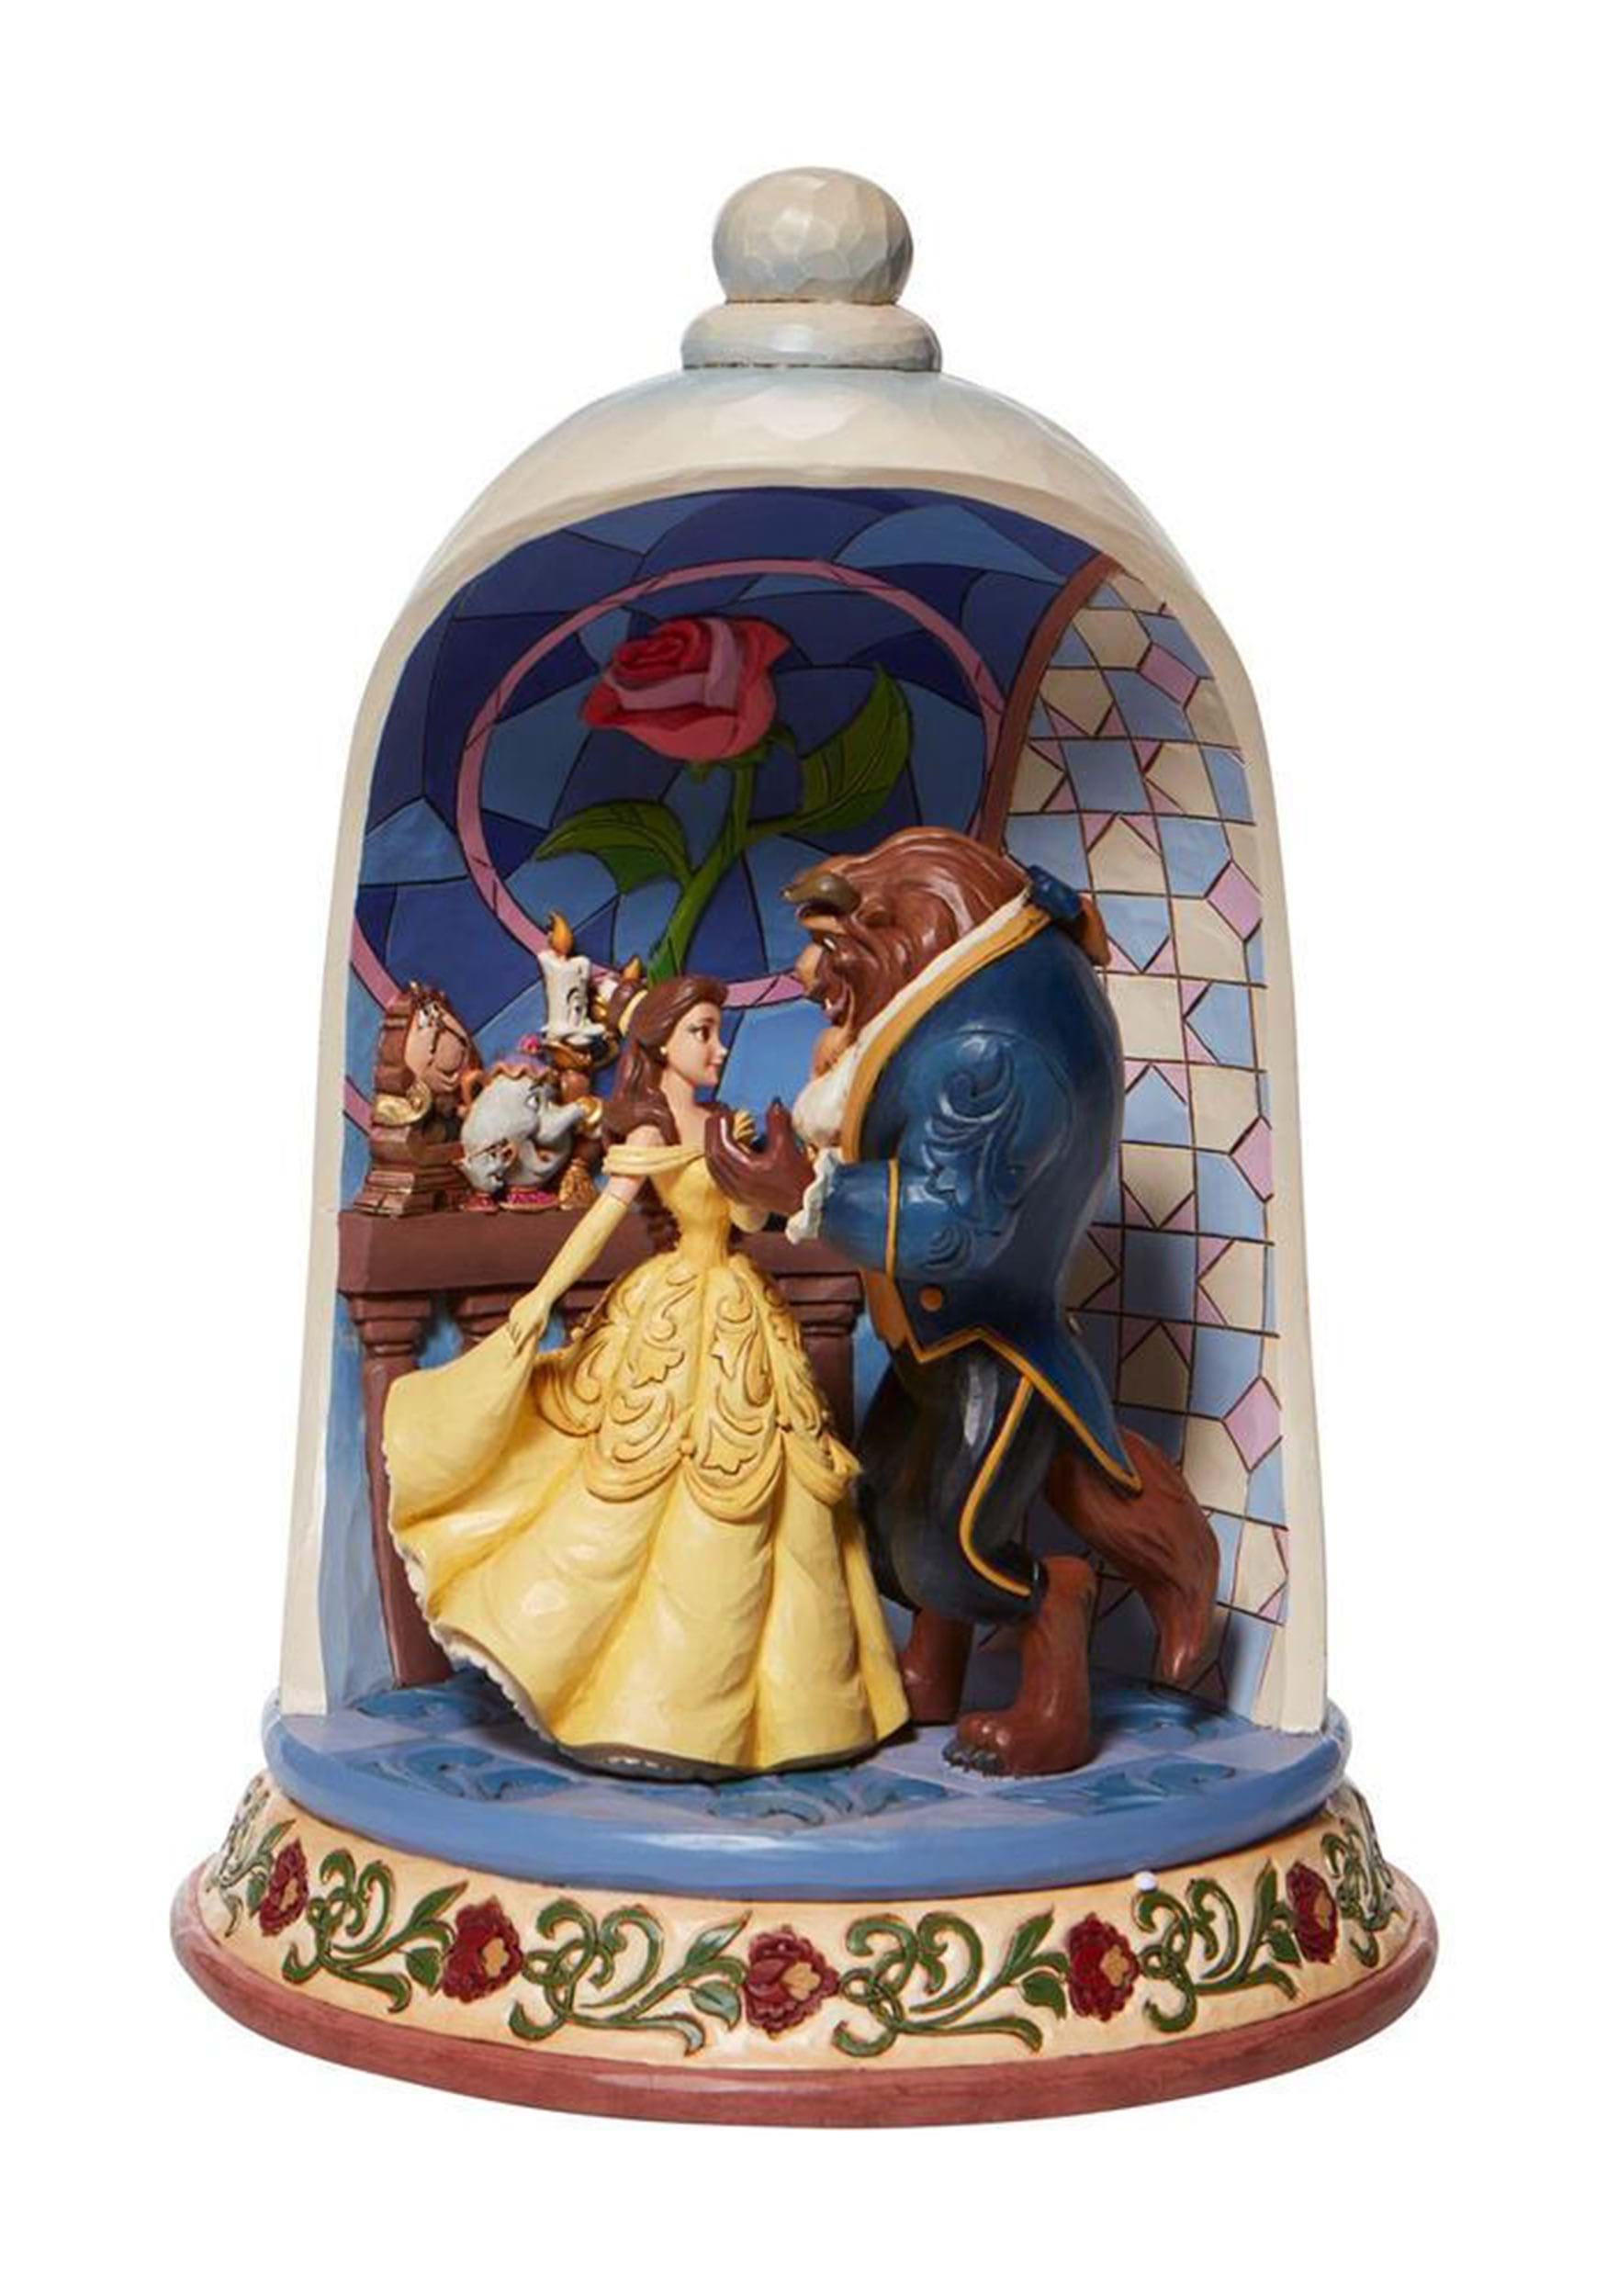 Beauty and the Beast Jim Shore Rose Dome Statue